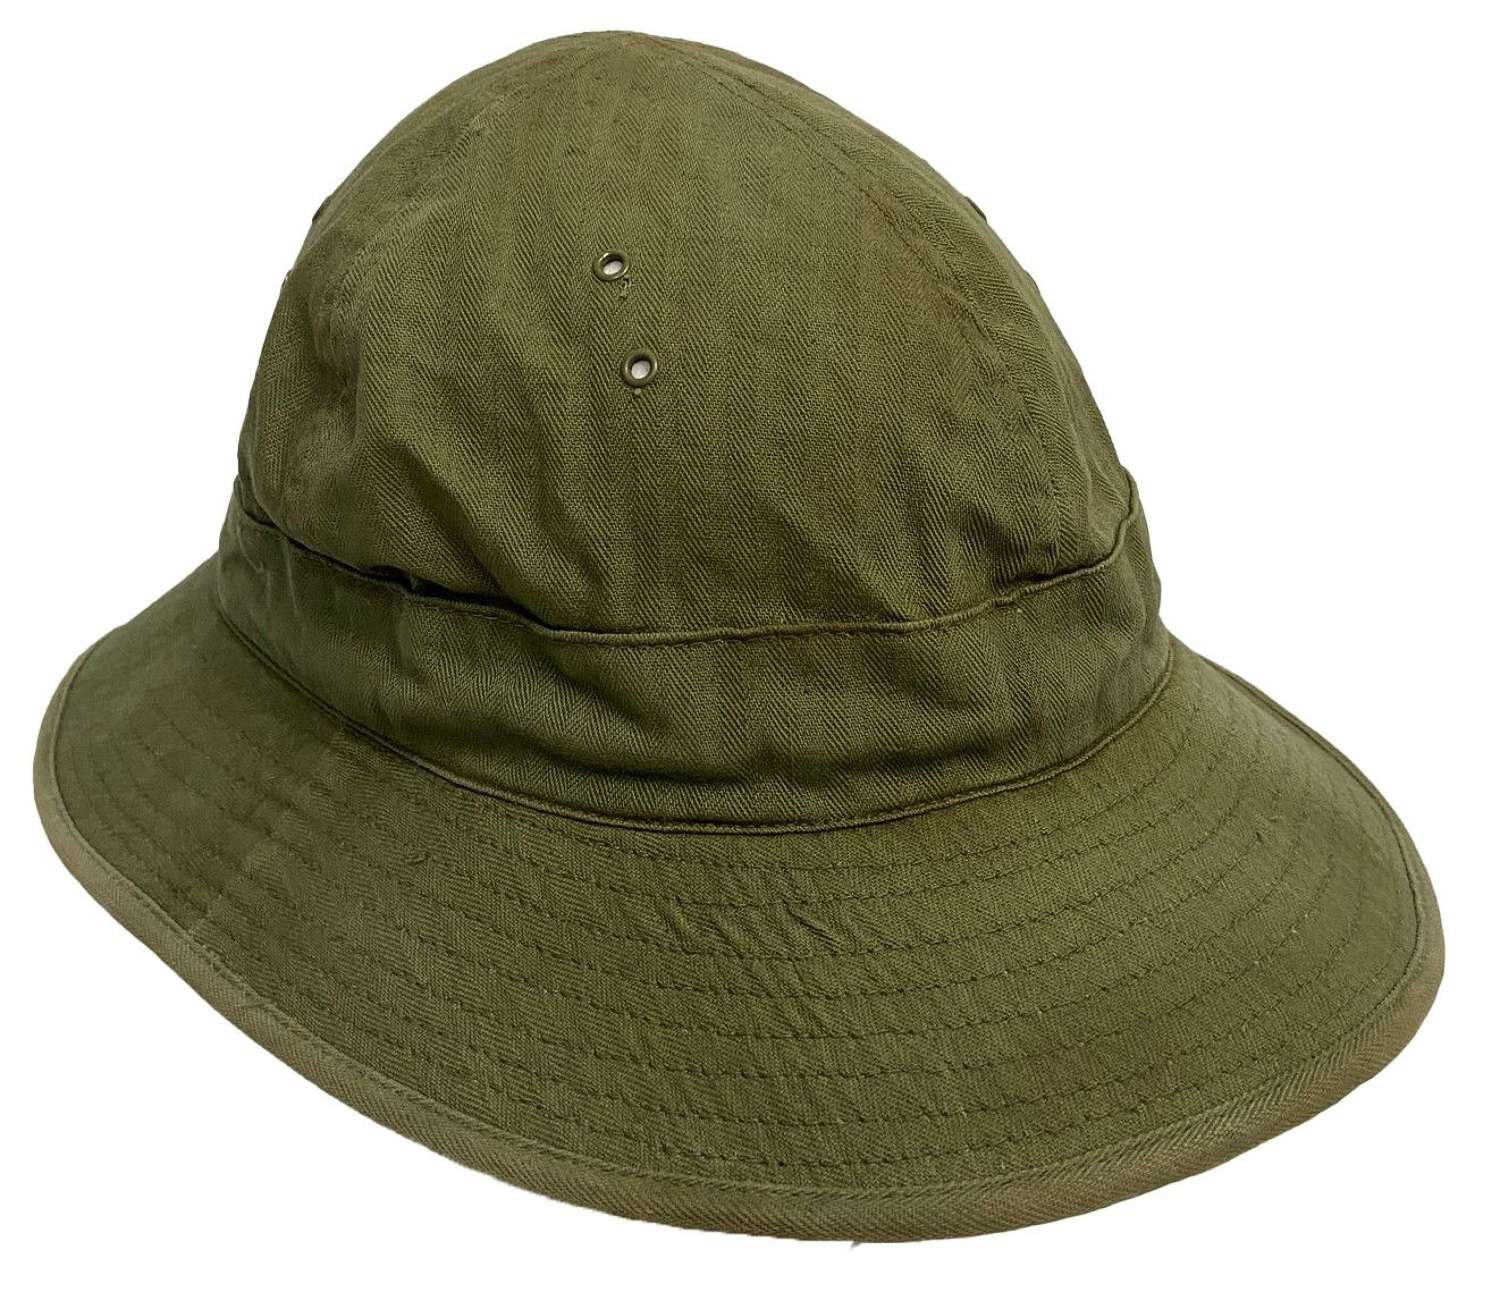 Original 1942 Dated US Army HBT 'Daisy Mae Hat' - Size 7 1/2